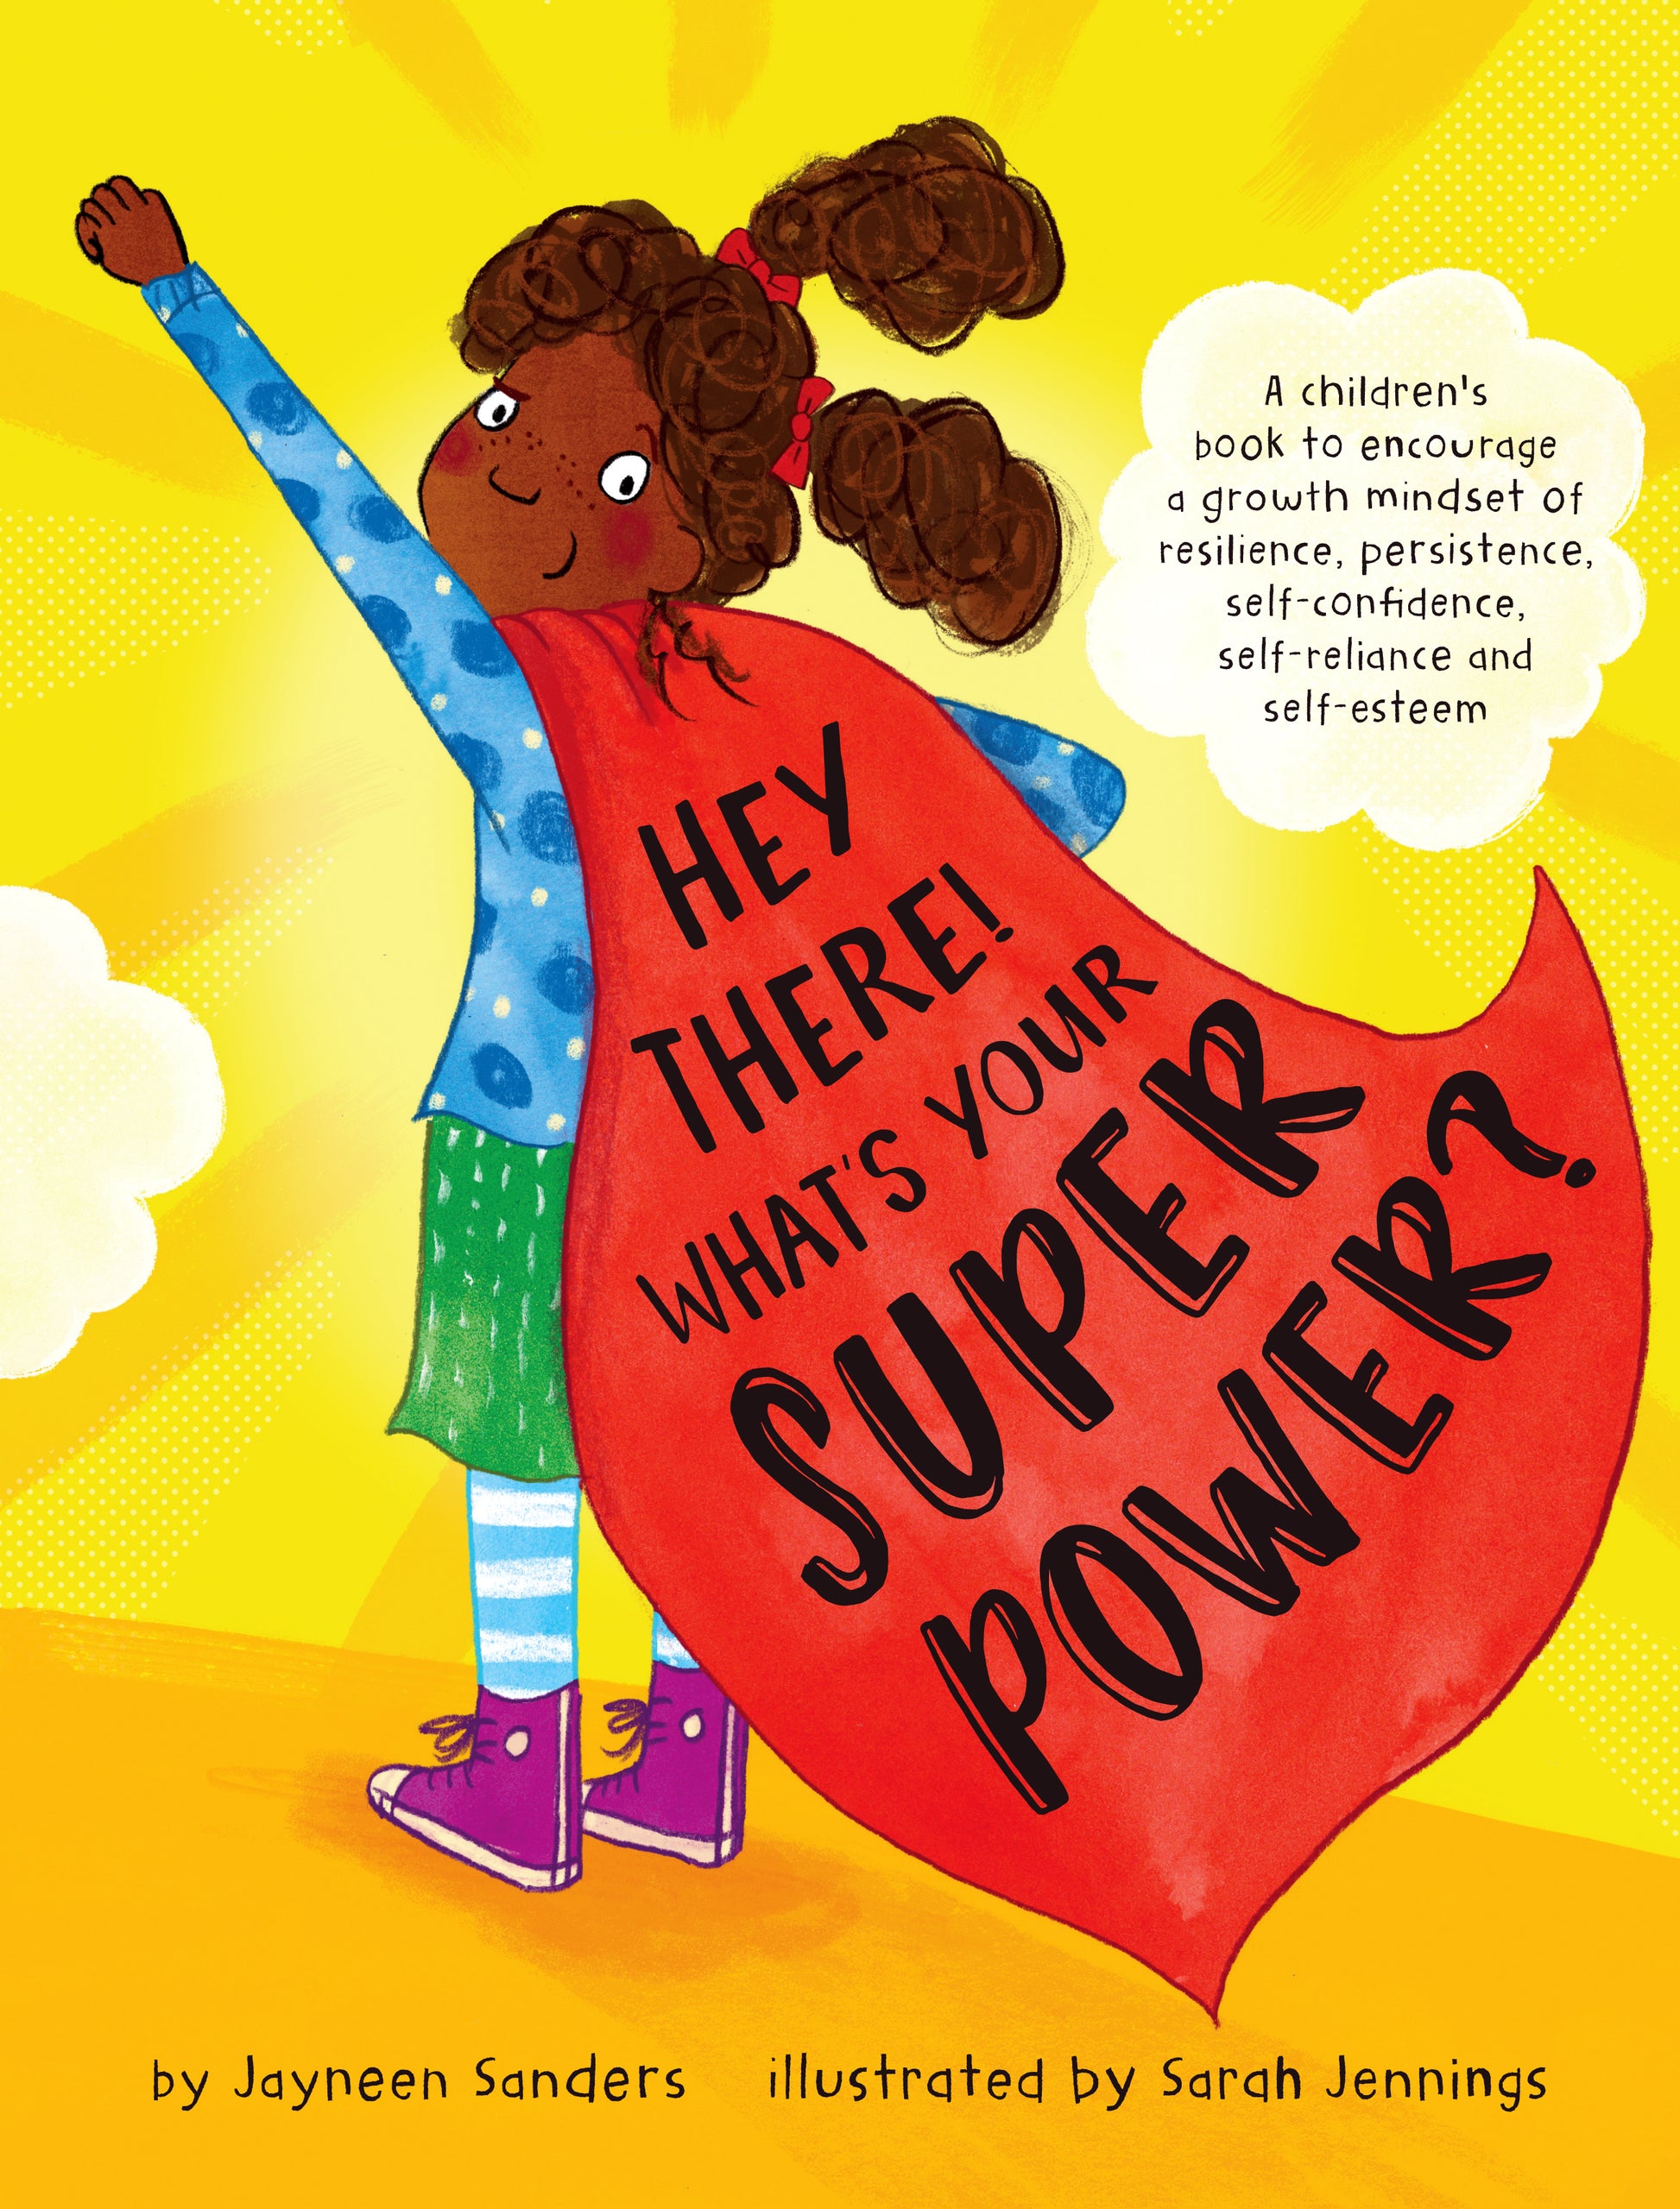 The cover of the book ‘Hey There! What's Your Superpower?’ by Jayneen Sanders.